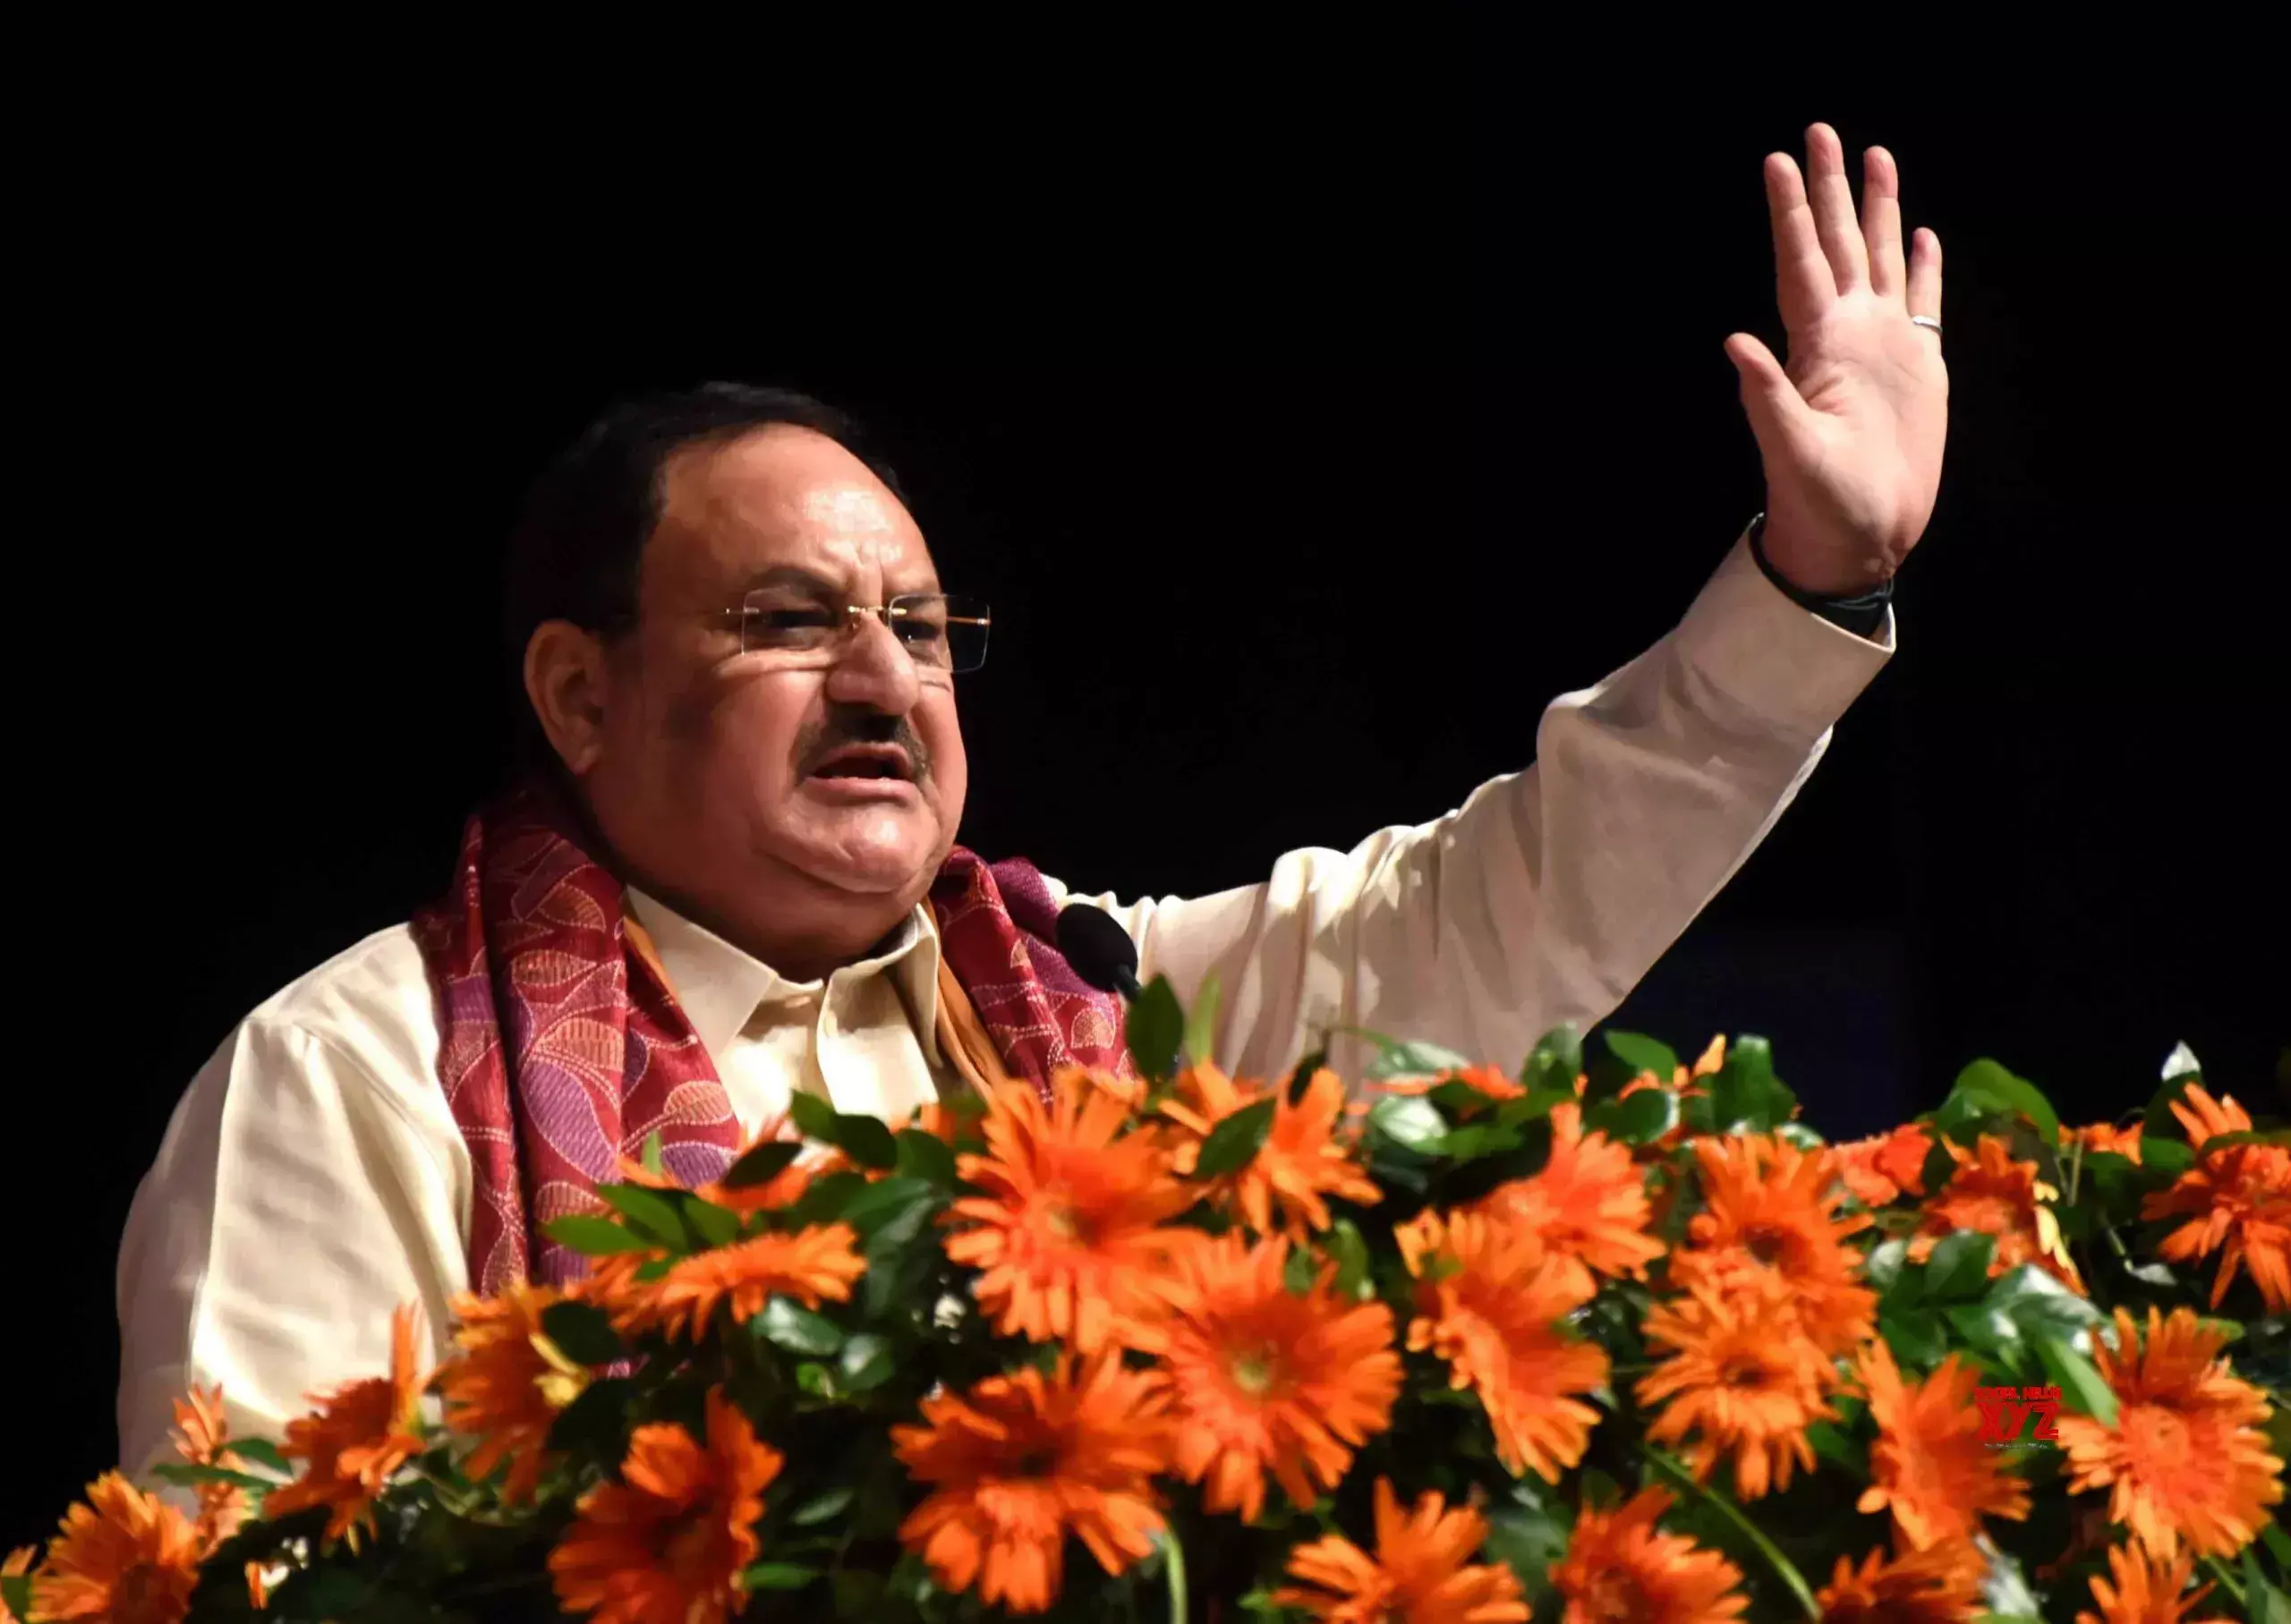 Rajasthan assembly polls: J P Nadda to hold talks with BJP leaders in Udaipur, Jodhpur